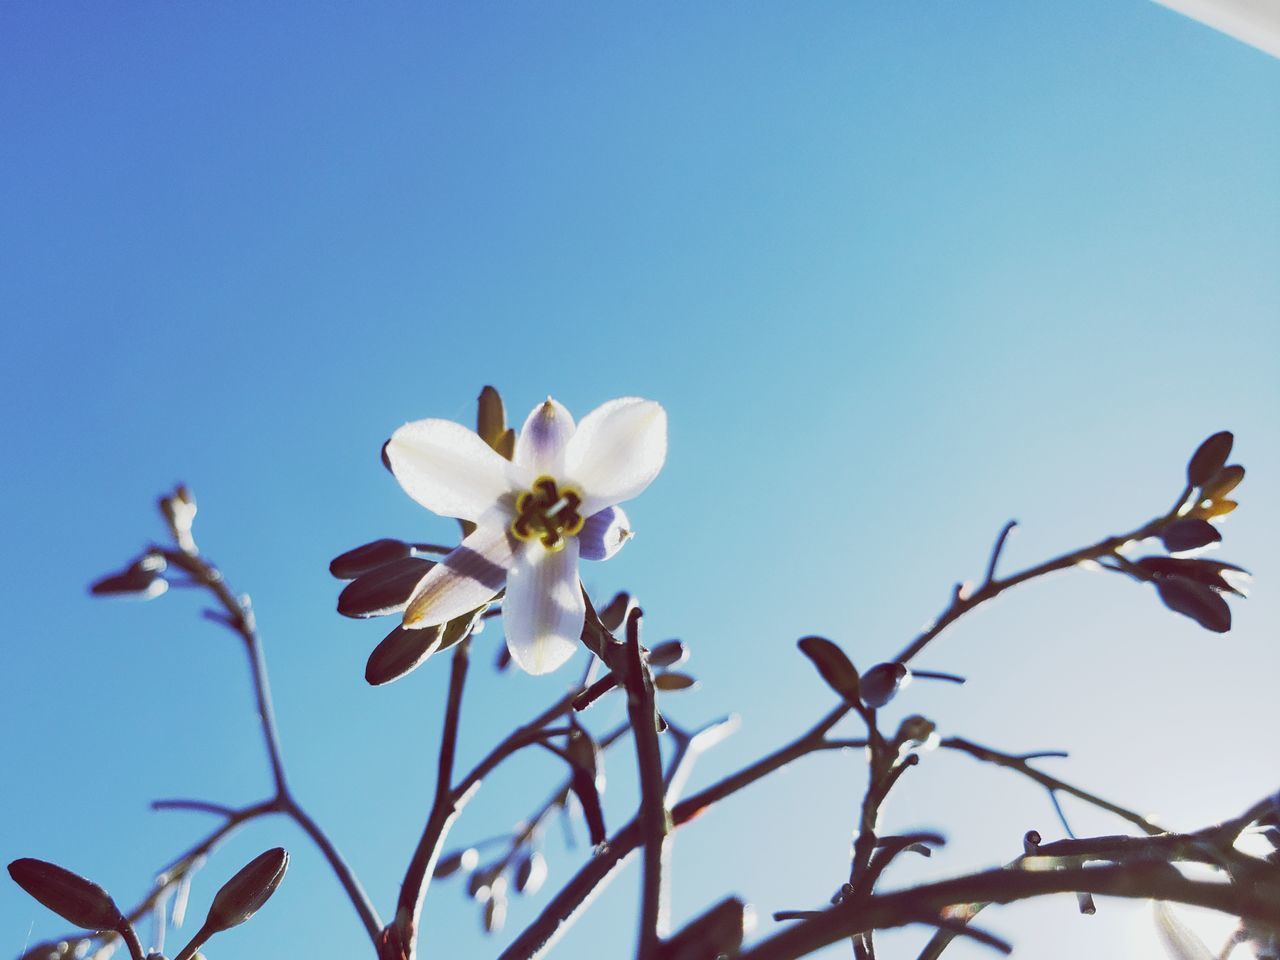 CLOSE-UP OF WHITE FLOWERING PLANT AGAINST BLUE SKY